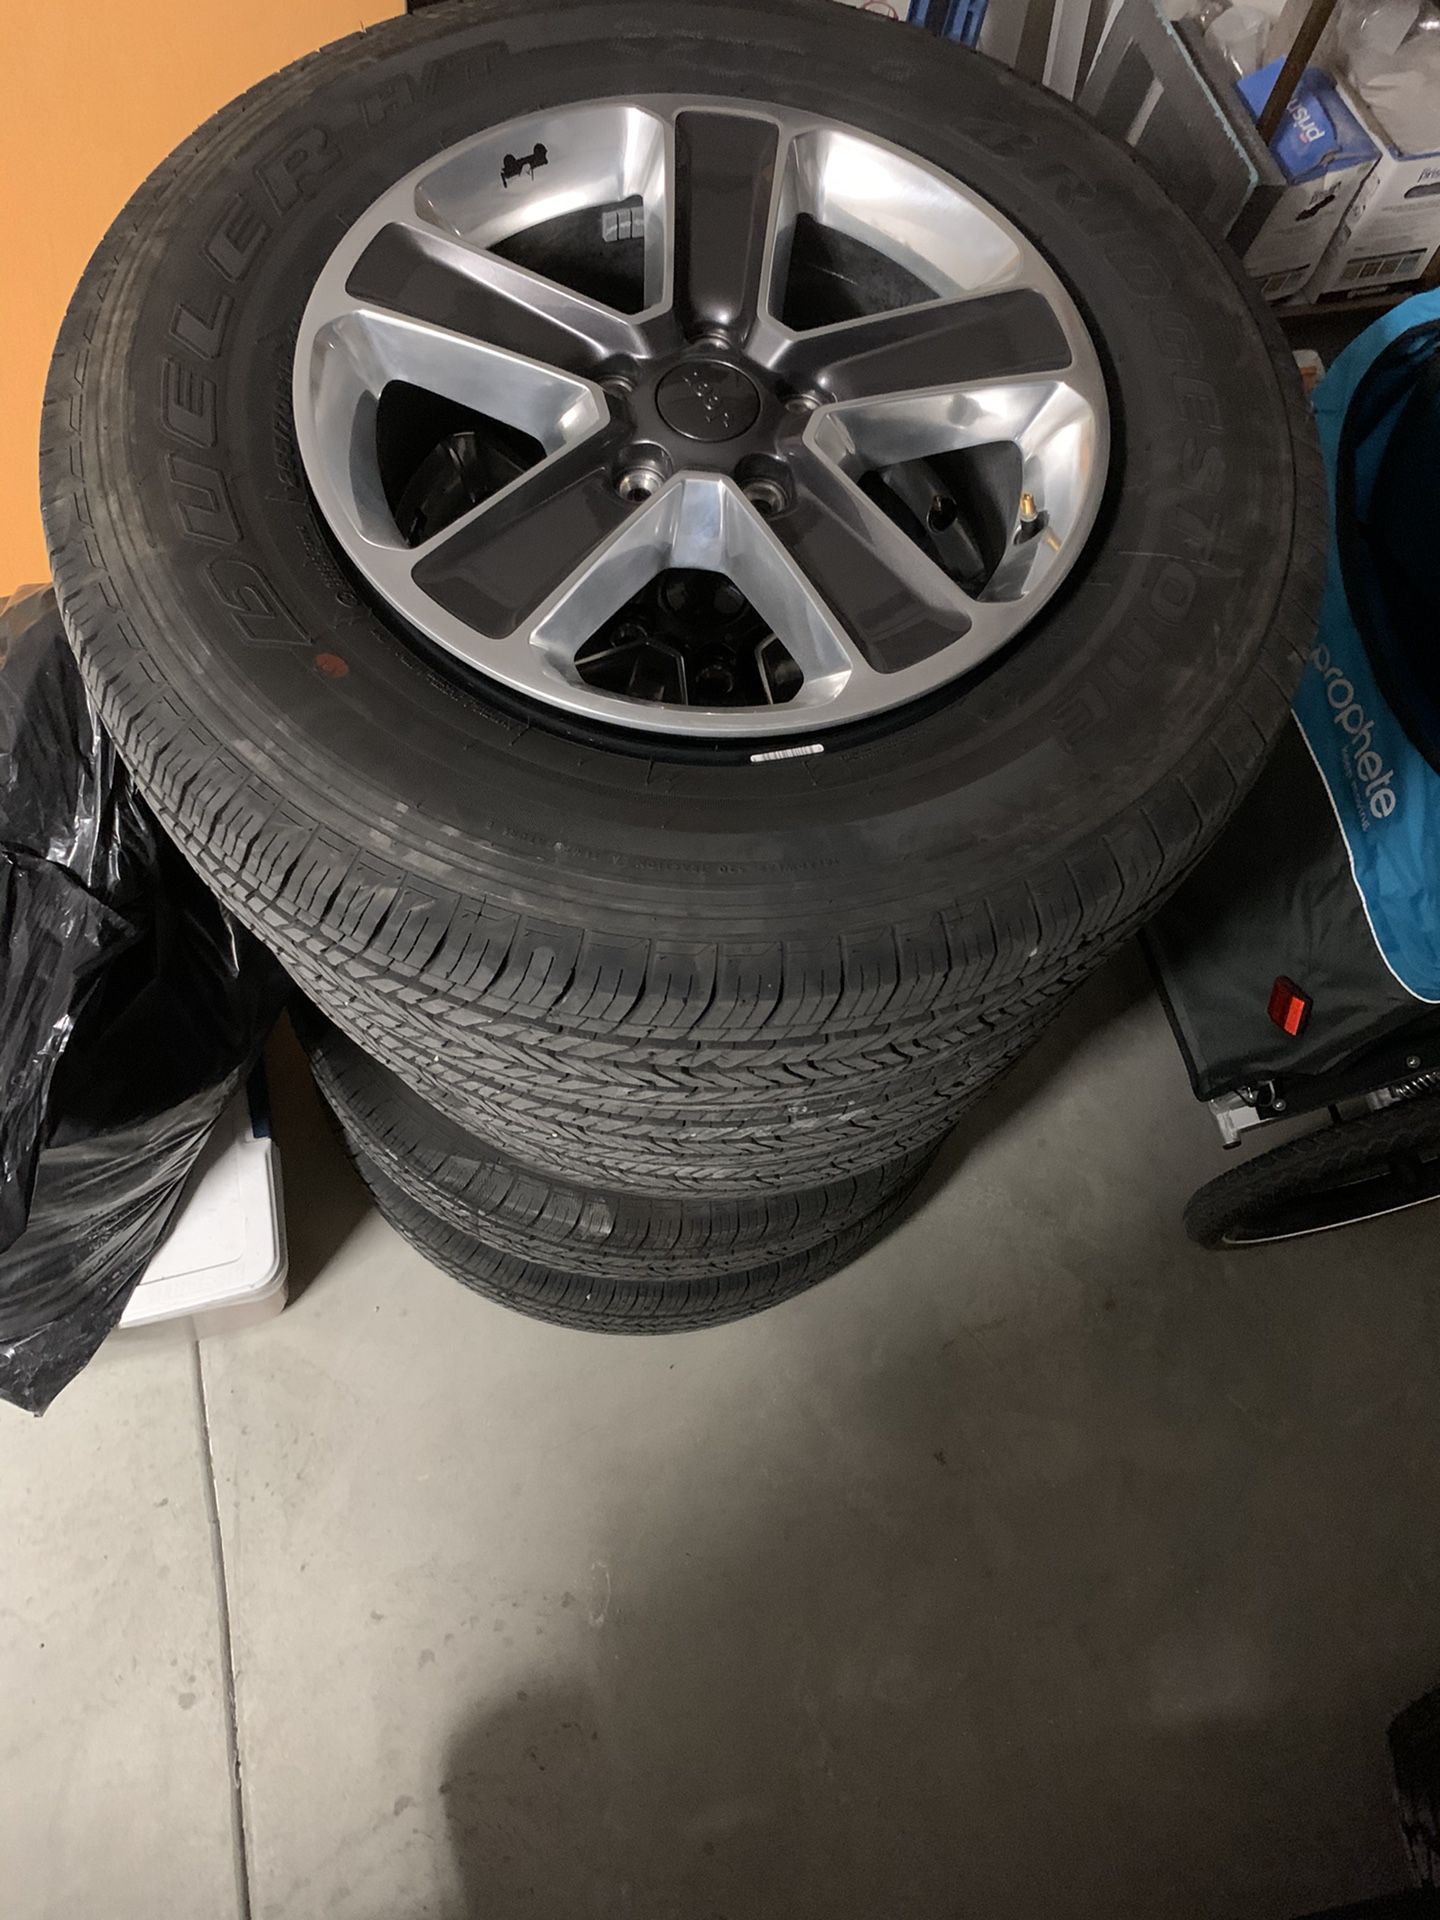 5 New Jeep Wrangler wheels and tires